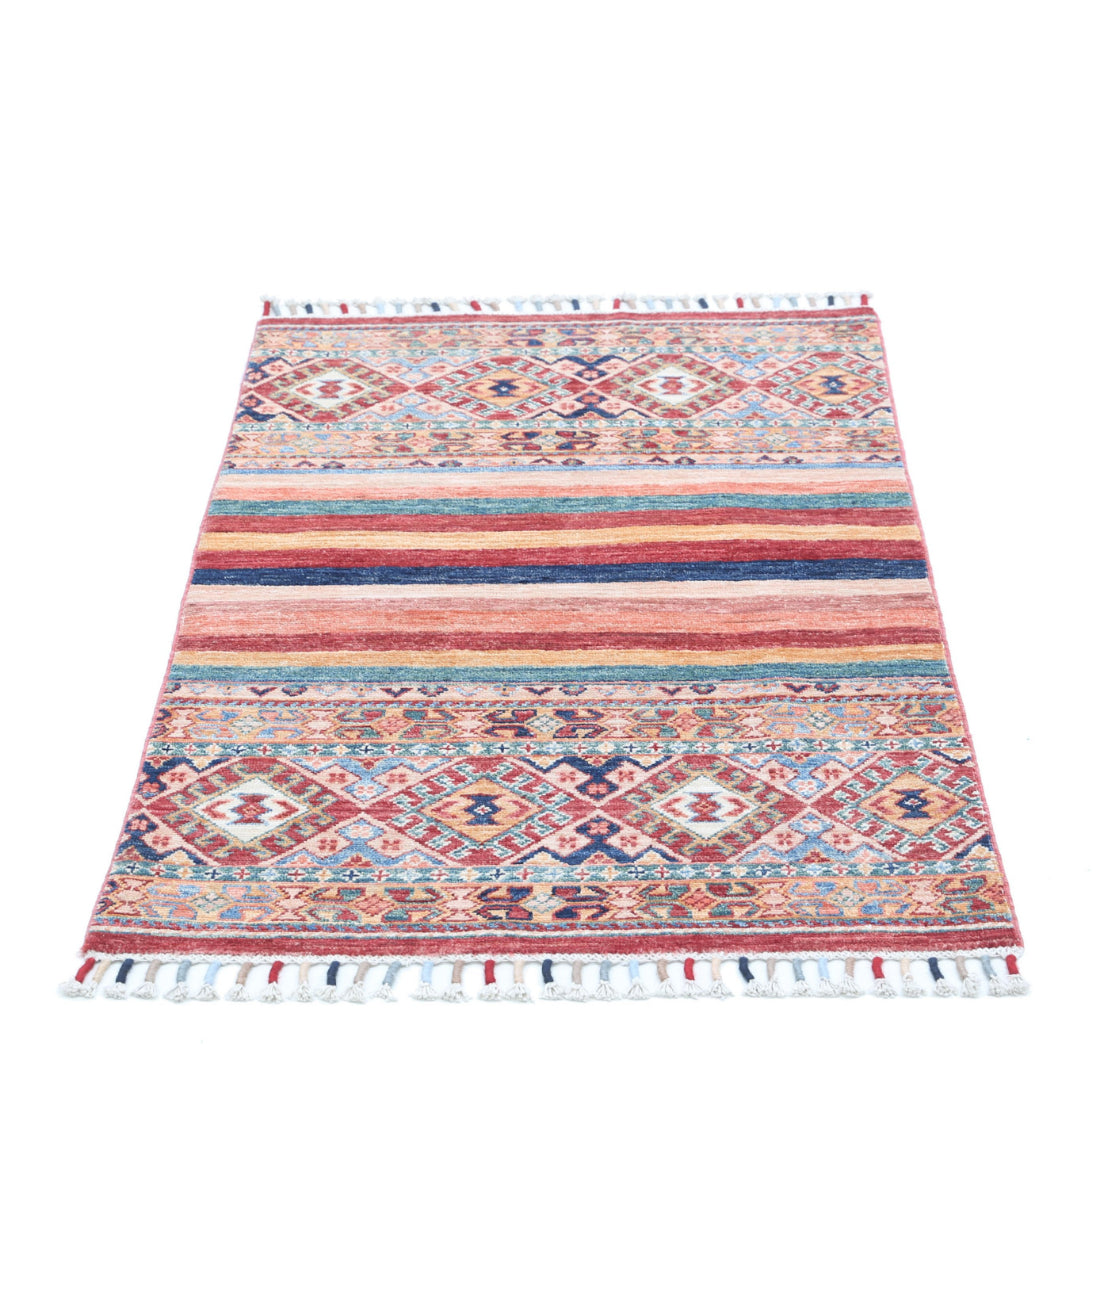 Hand Knotted Khurjeen Wool Rug - 2'6'' x 3'10'' 2'6'' x 3'10'' (75 X 115) / Multi / Multi